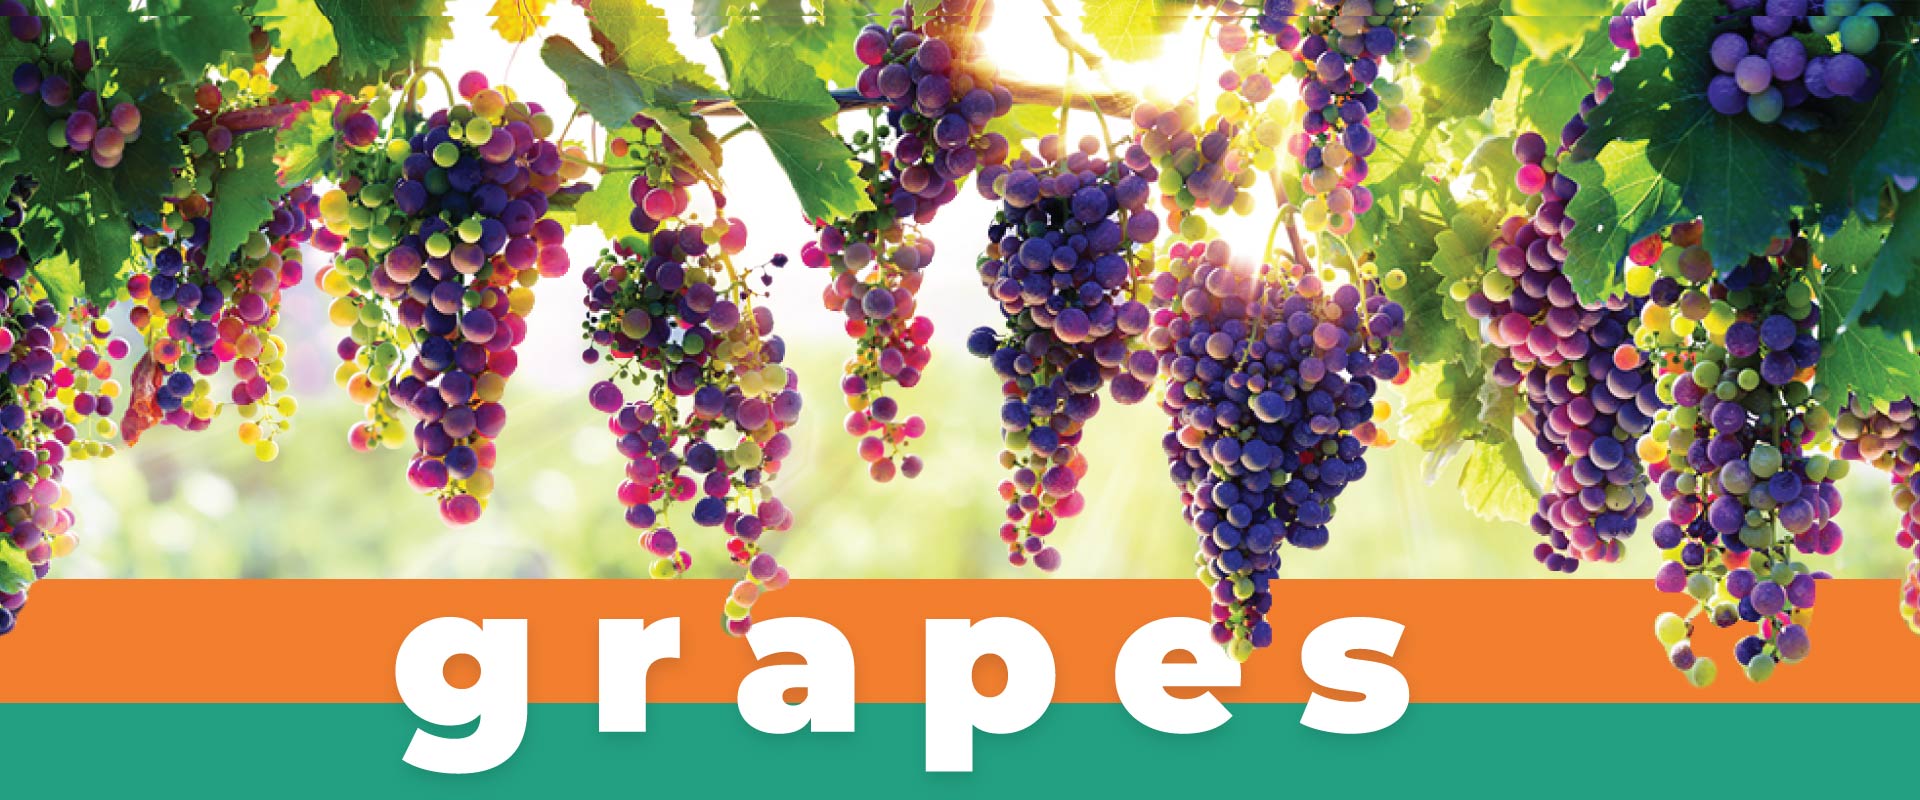 <a href="https://valleypackinginc.com/valley-packing-grapes">Grapes</a> produce in california united states